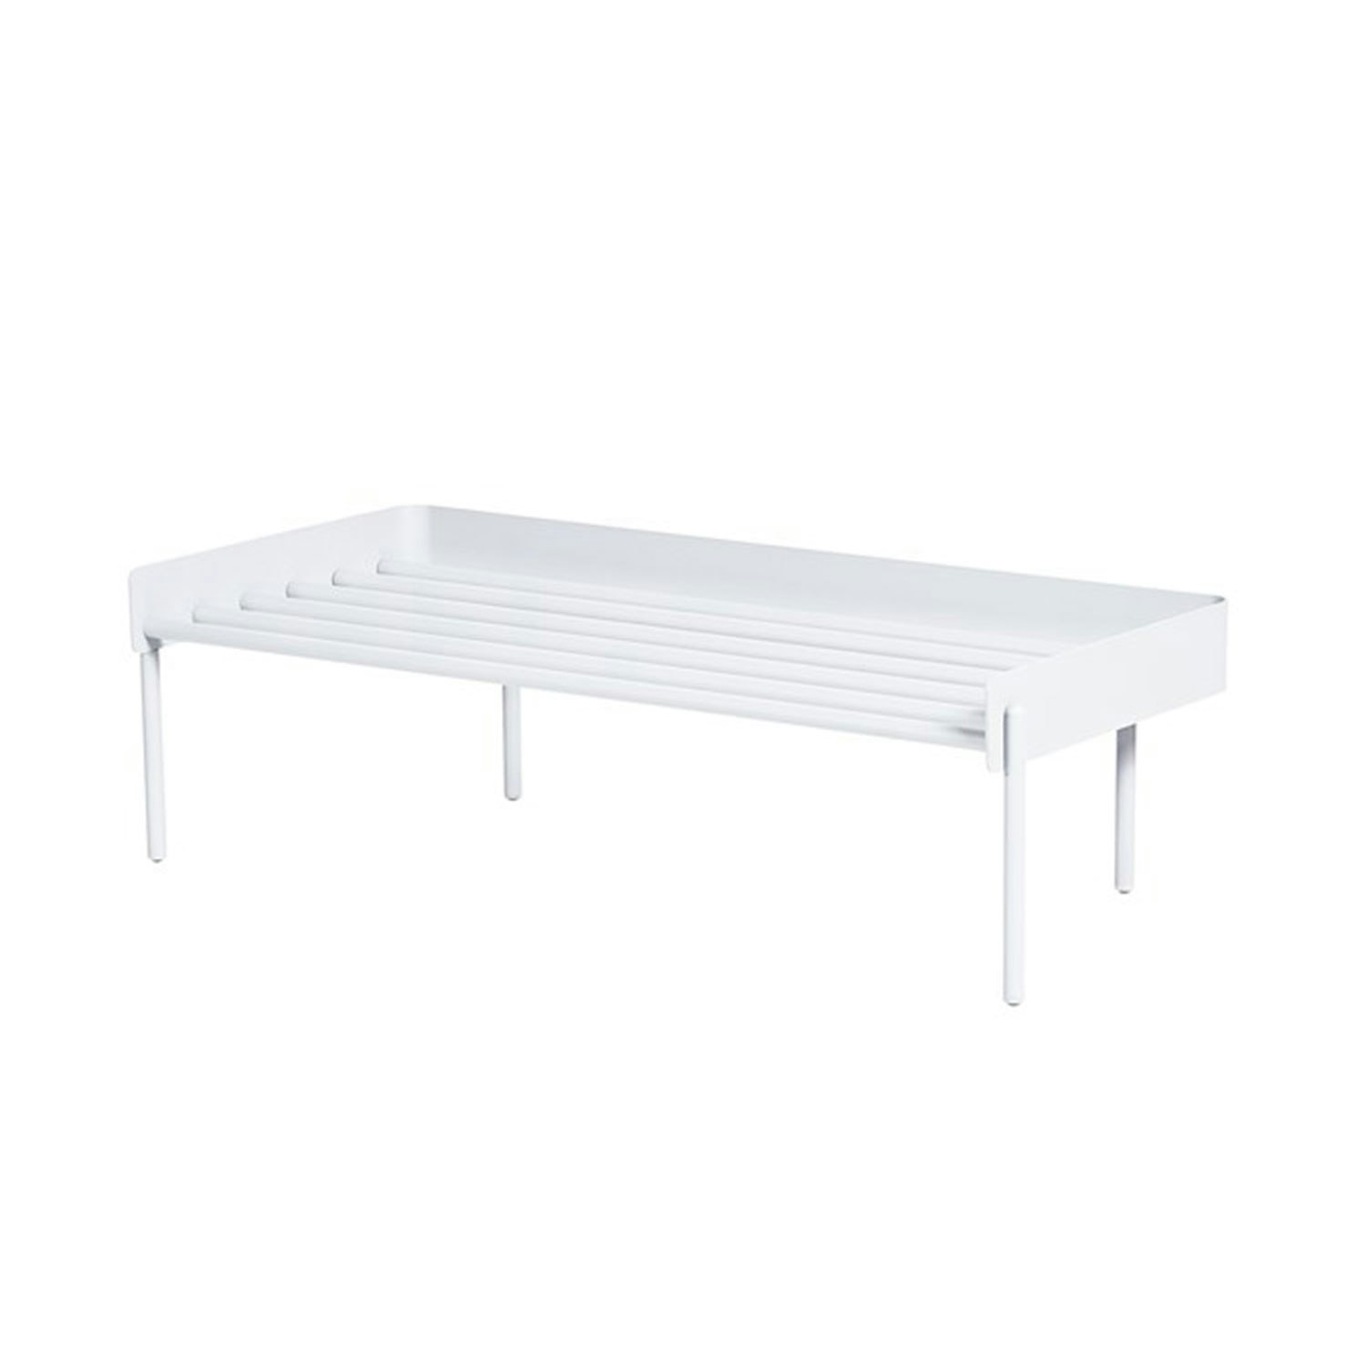 Alfred Shoe Rack Extension Section, White